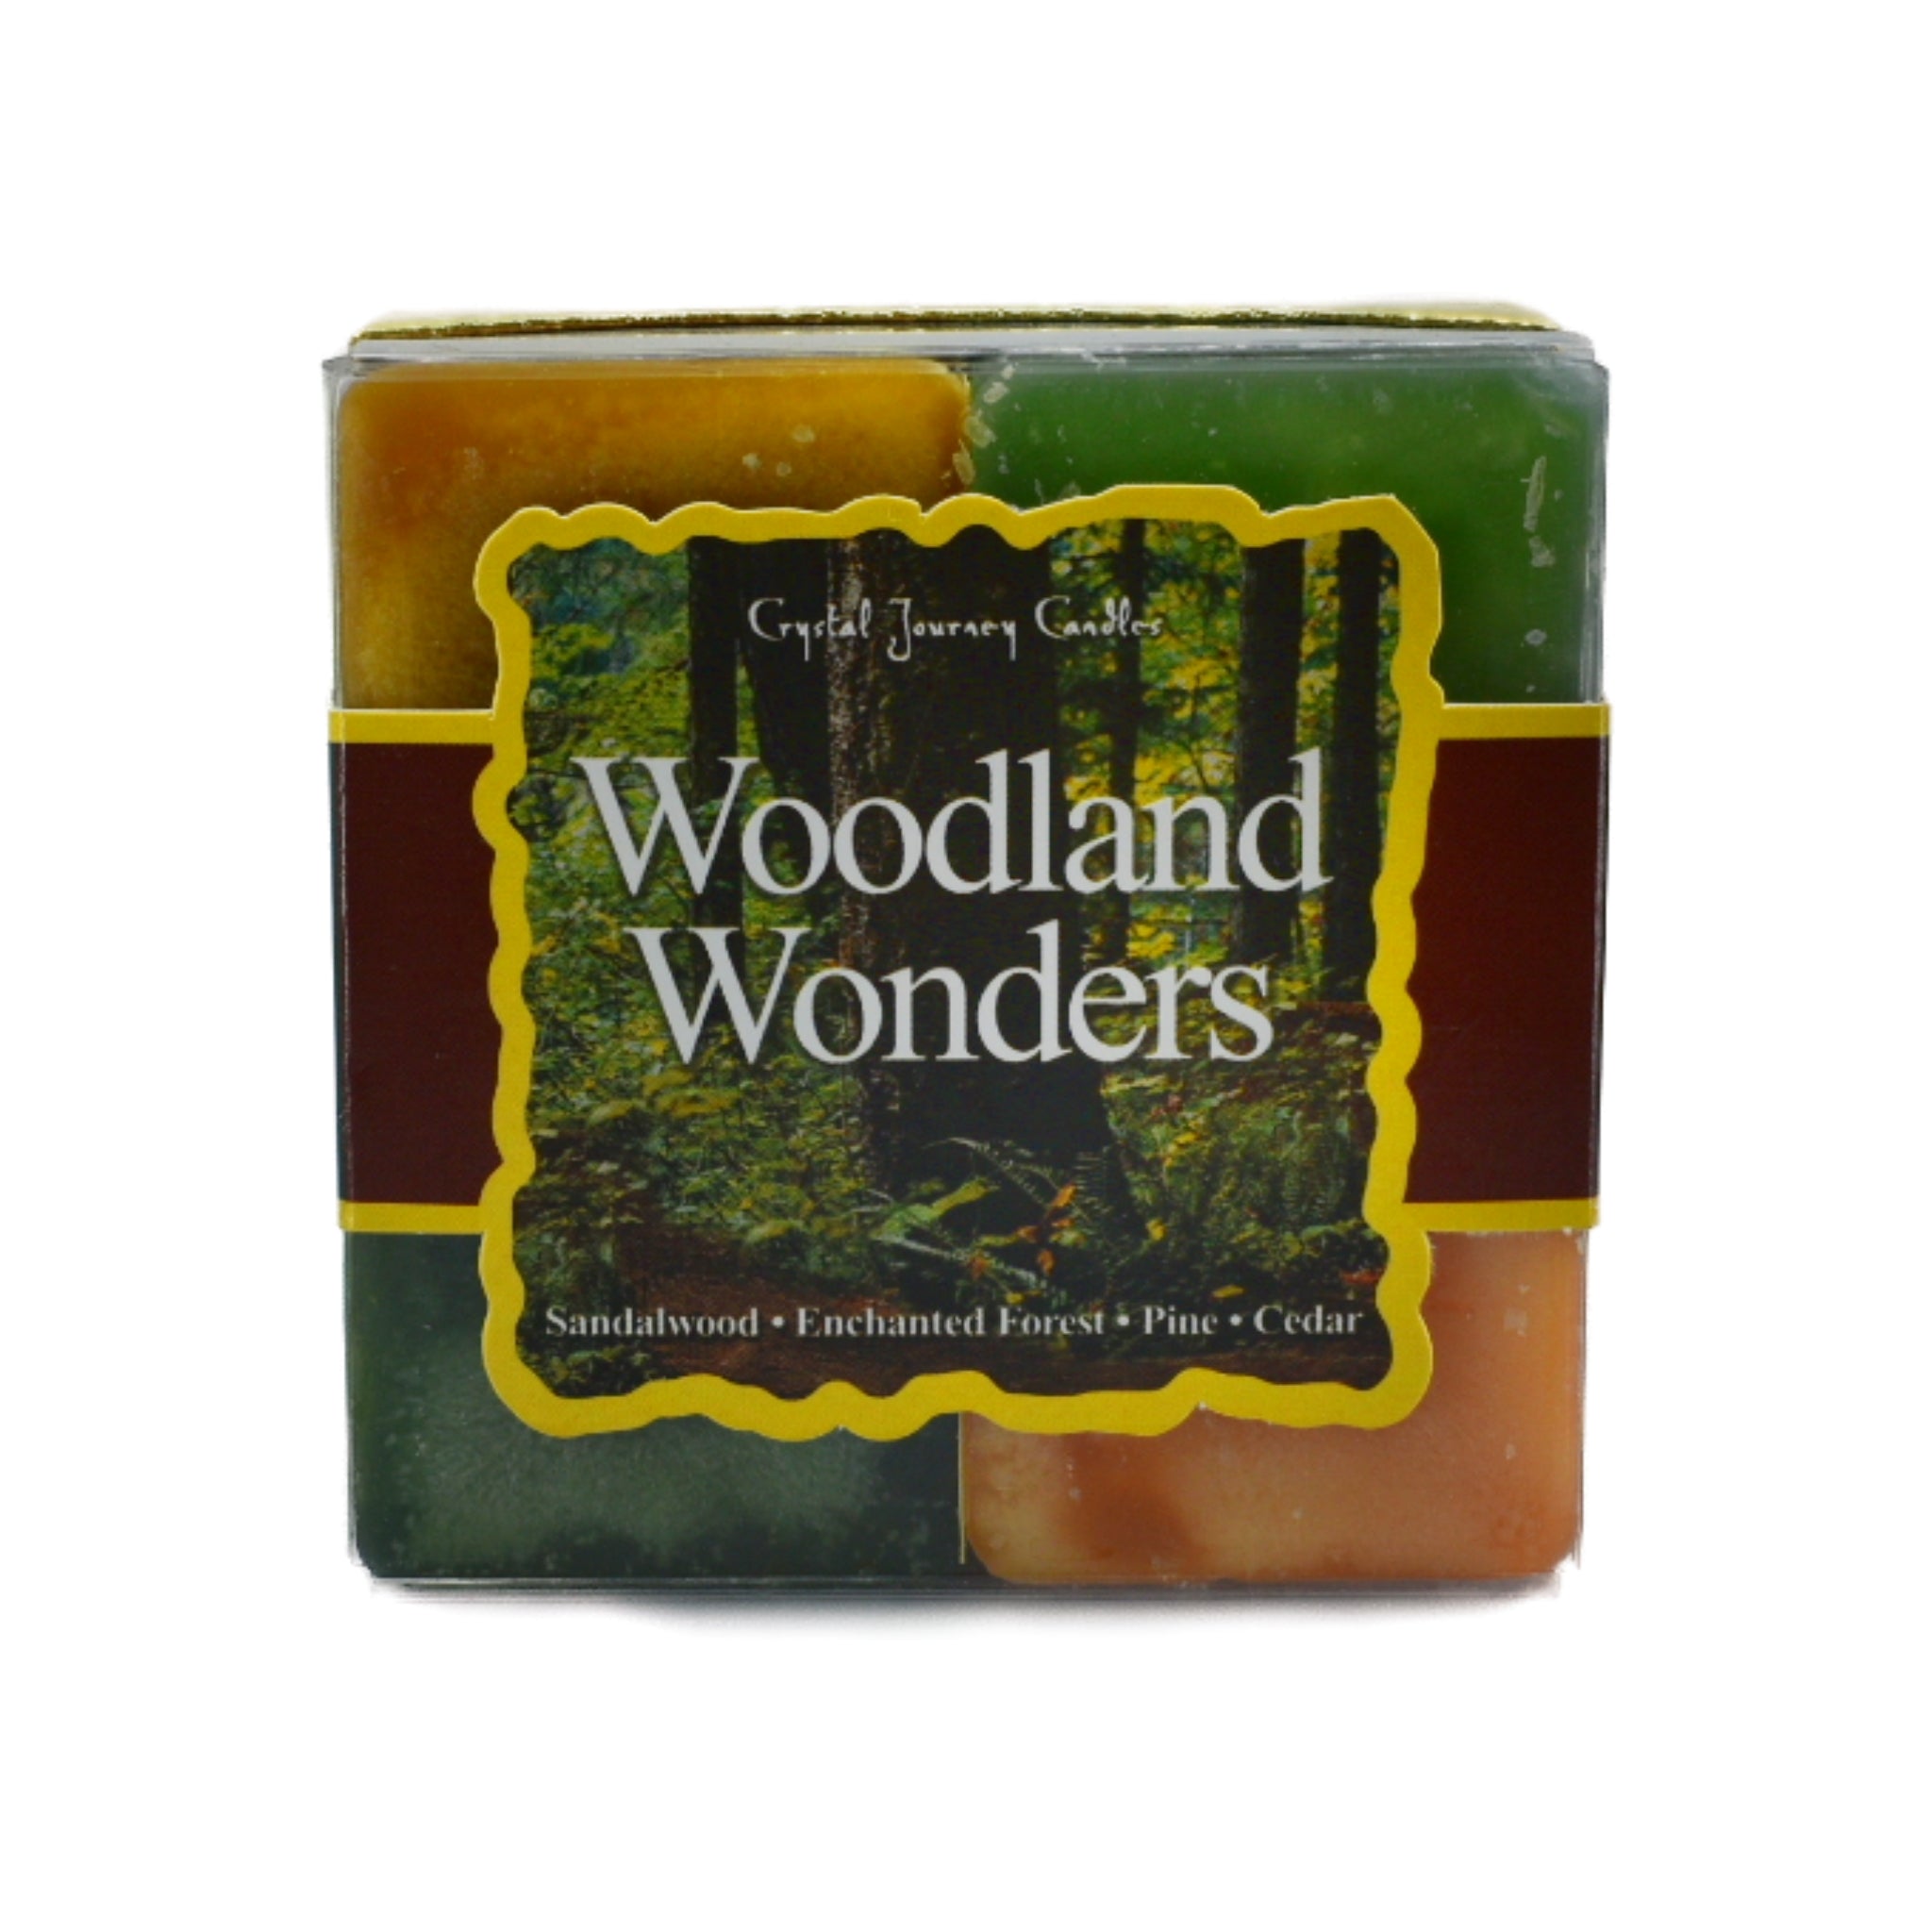 Woodland Wonders Square Pack Candle.  Uniquely created to release the possibilities of a secret world in the depths of a tranquil forest.  The candles are scented with sandalwood, pine, cedar and enchanted forest.